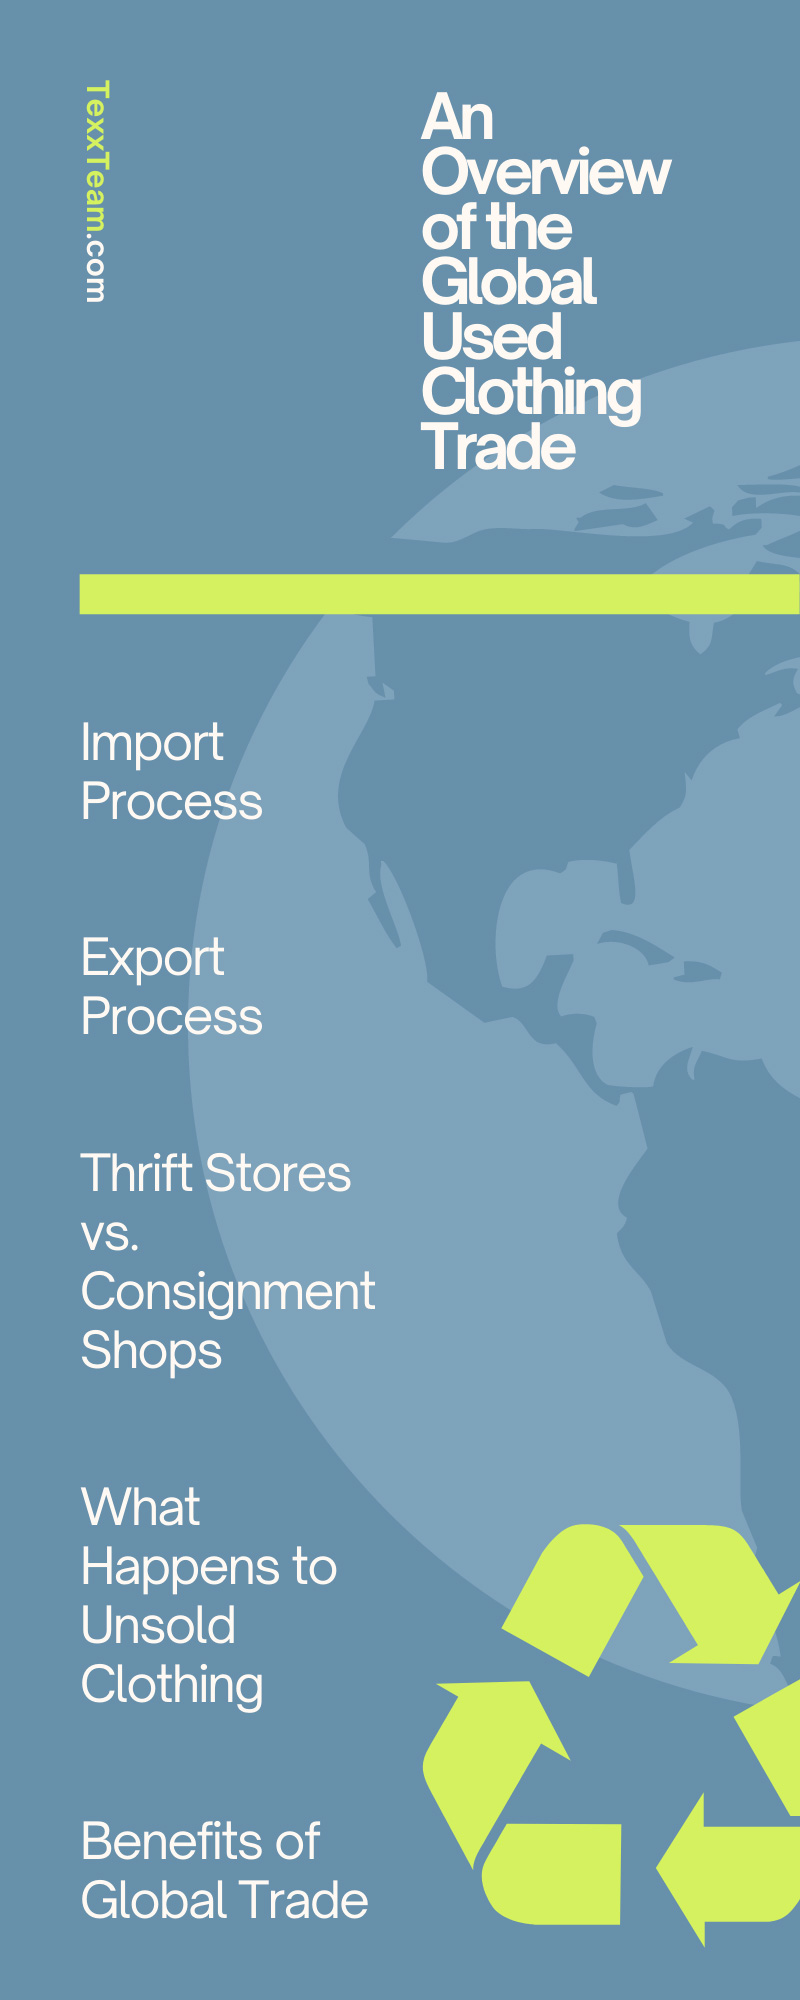 An Overview of the Global Used Clothing Trade